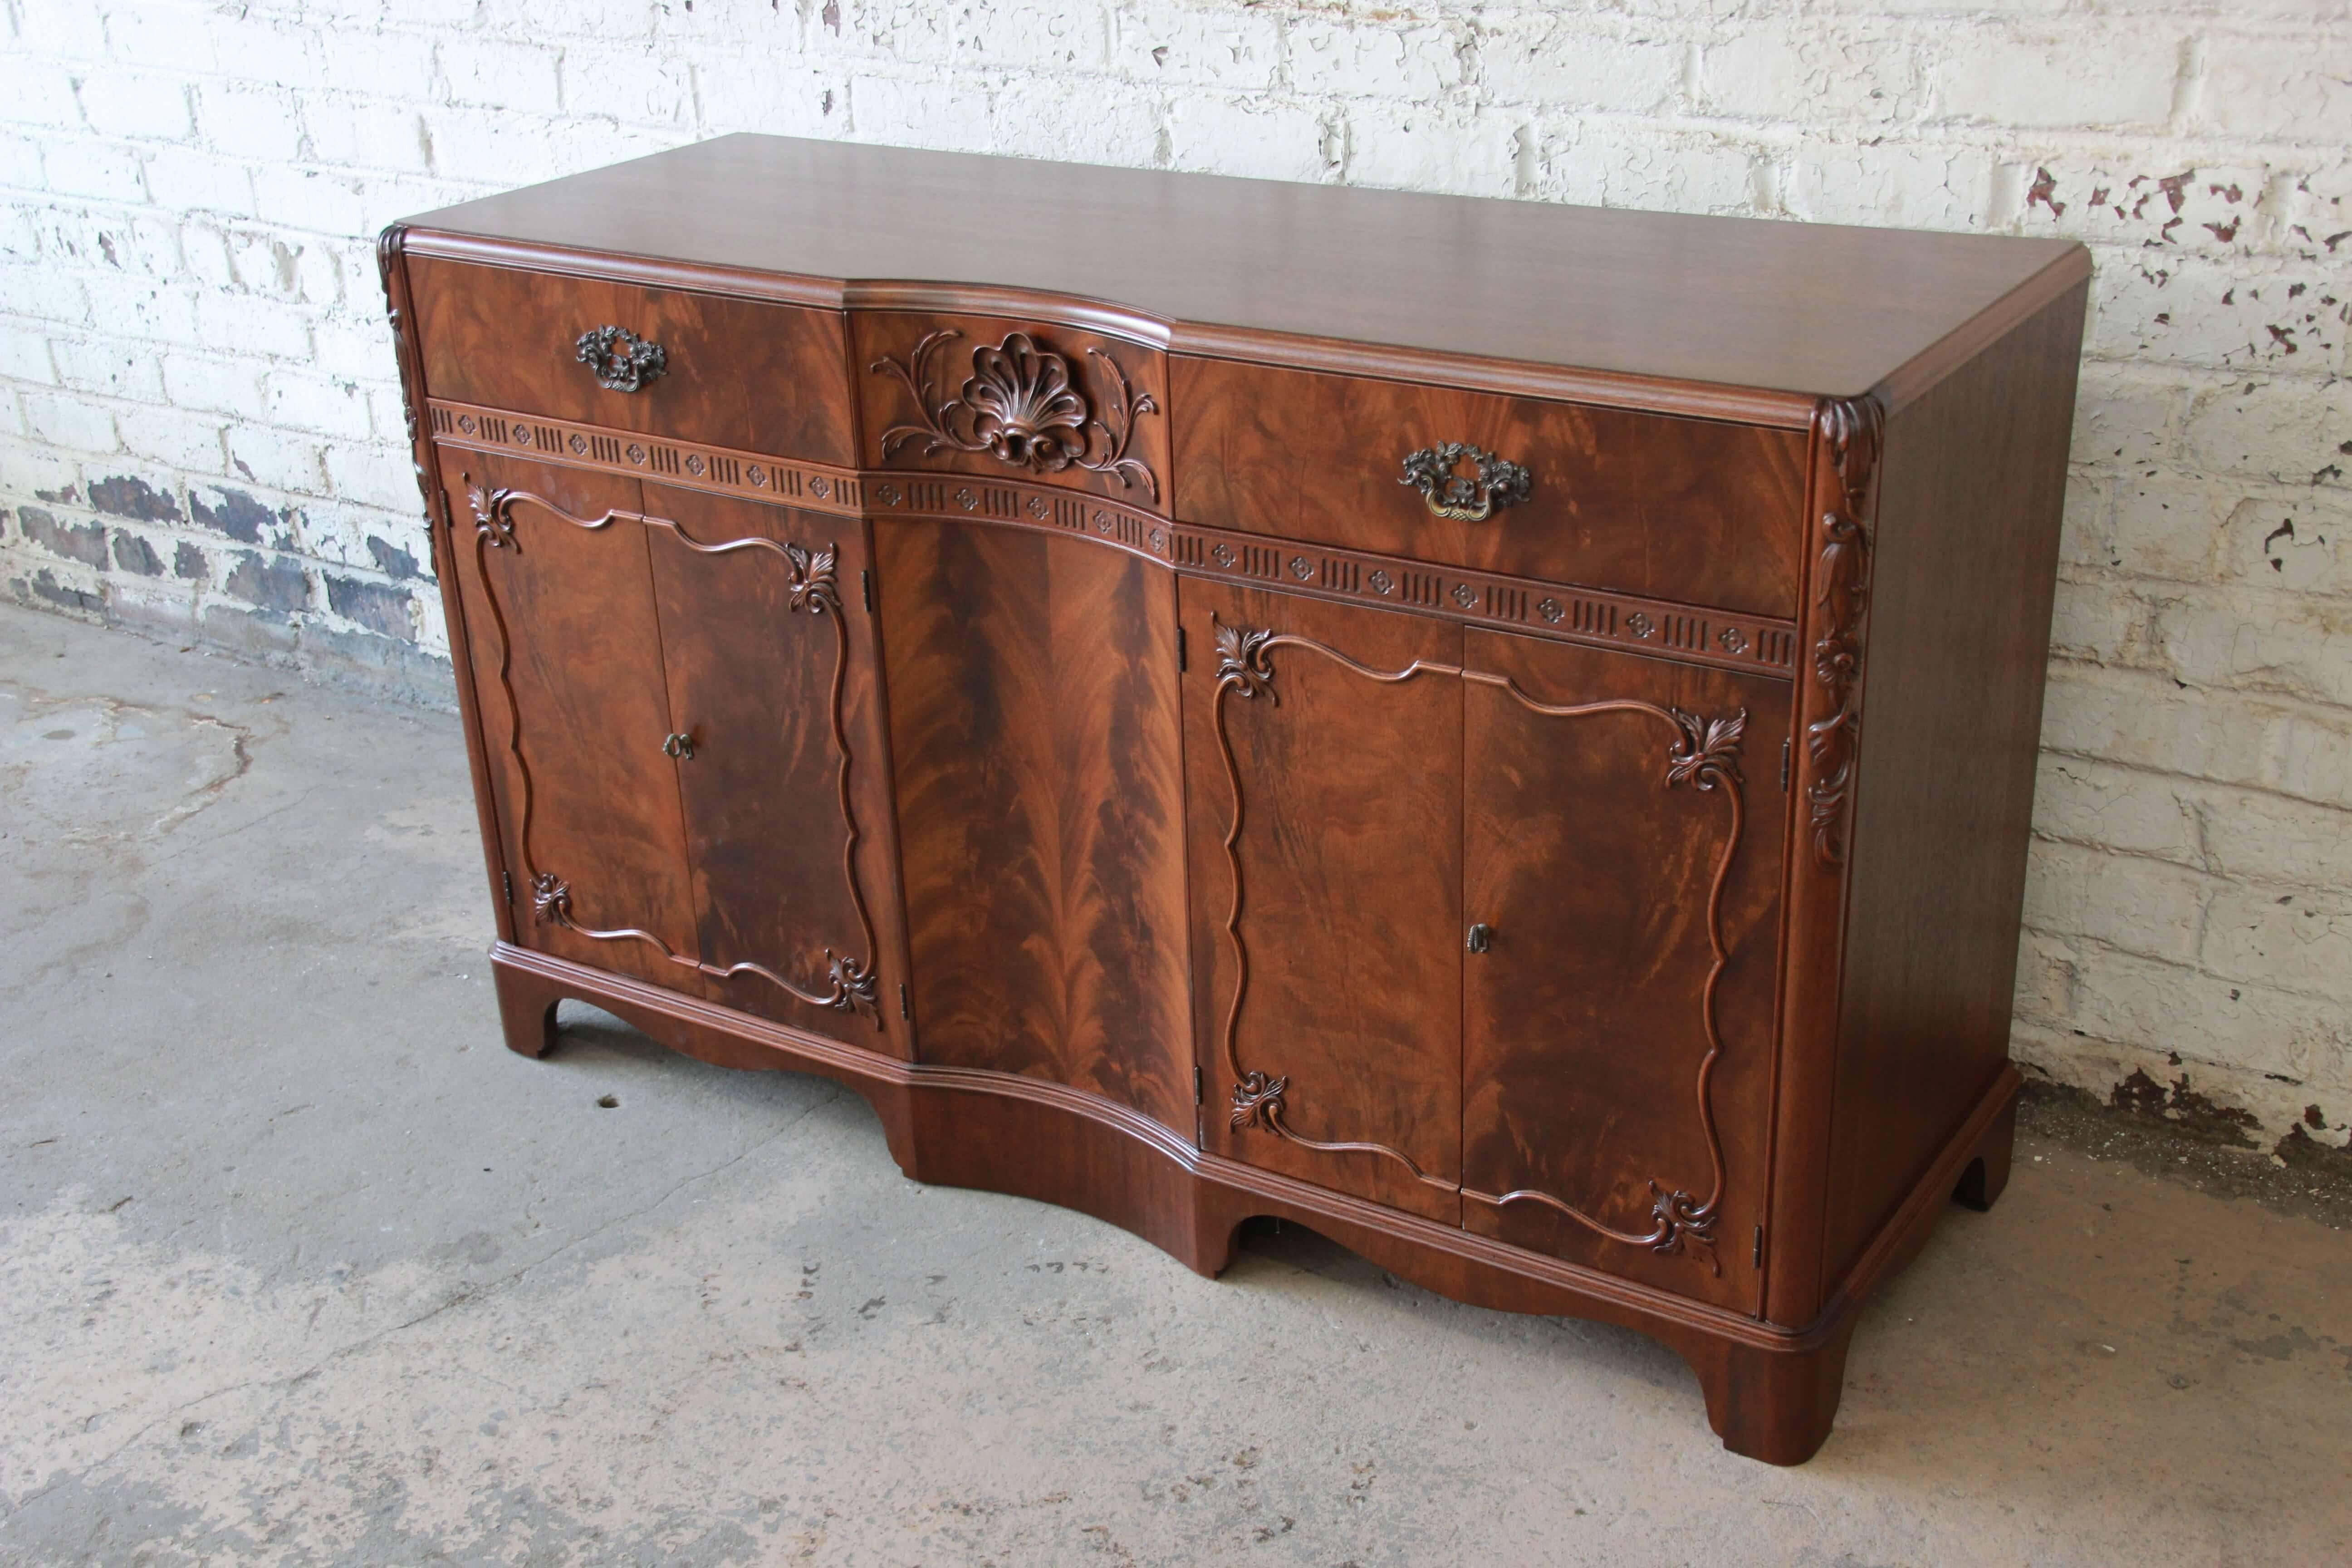 Offering a very beautiful French carved flamed walnut sideboard by Landstrom. This piece has statement making wood grain with fine carved details. There are three drawers at the top, one with a French carved pull. The left portion of the sideboard